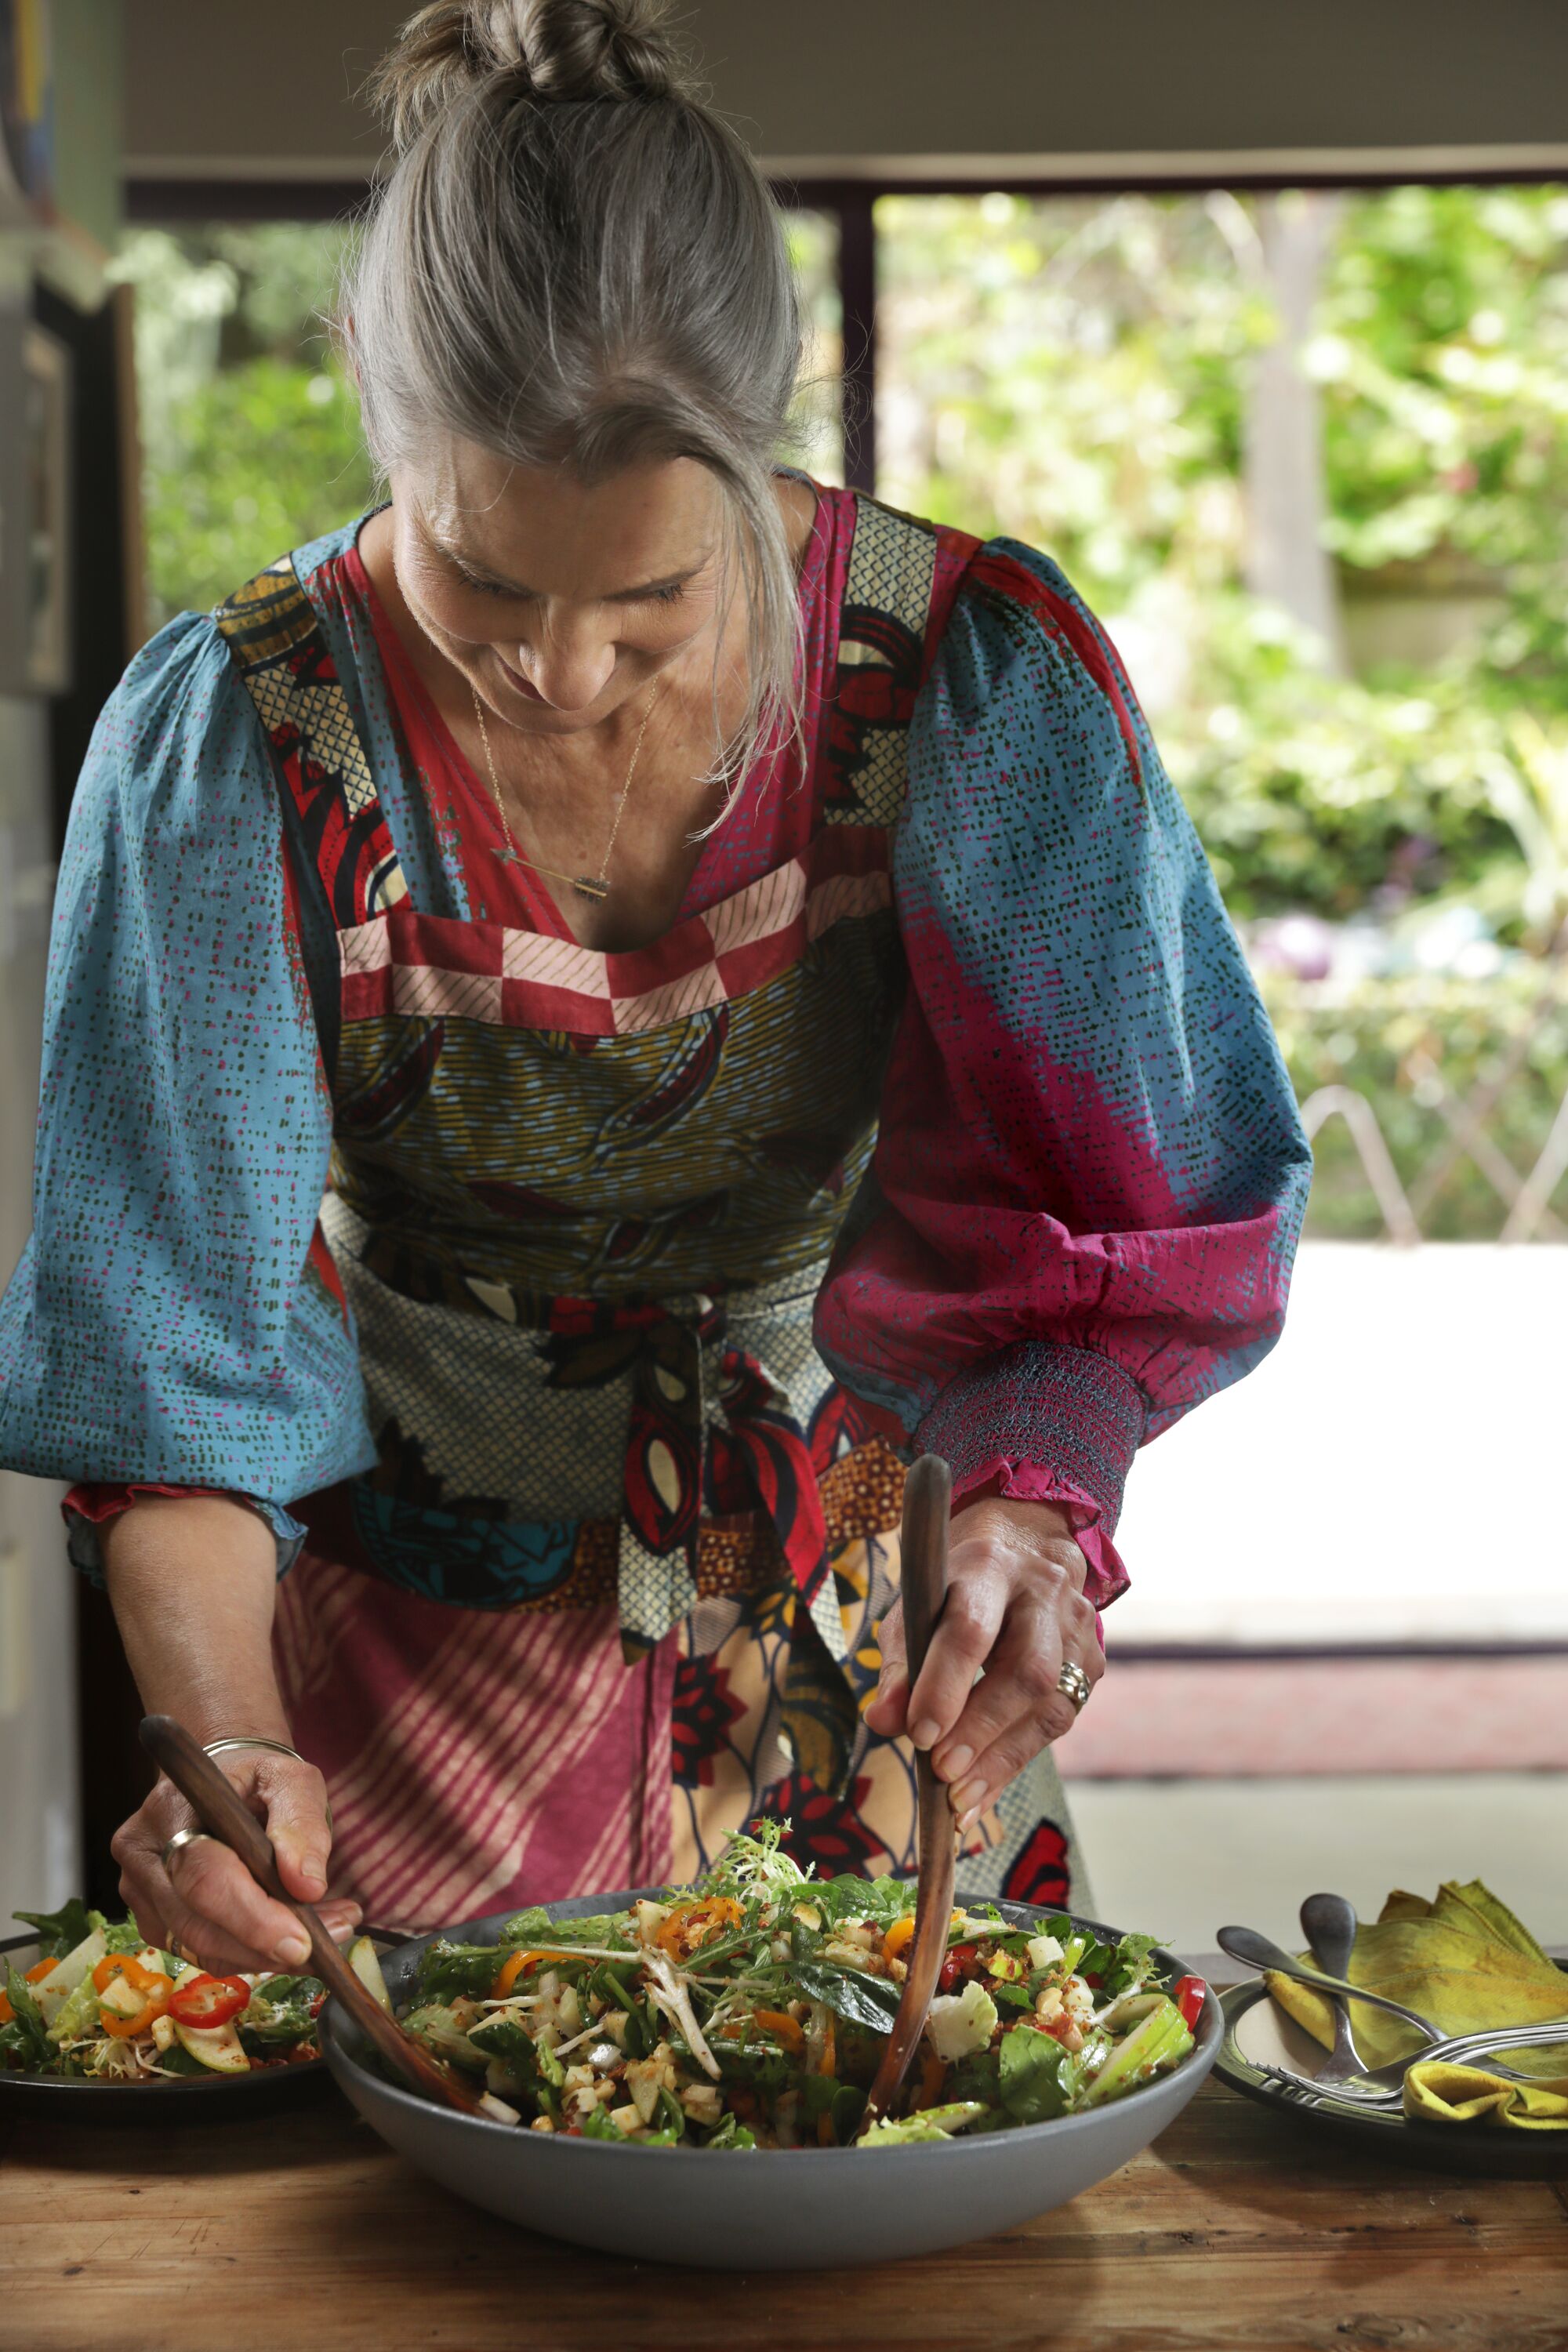 A woman in a kitchen leans over a bowl of salad on a counter.